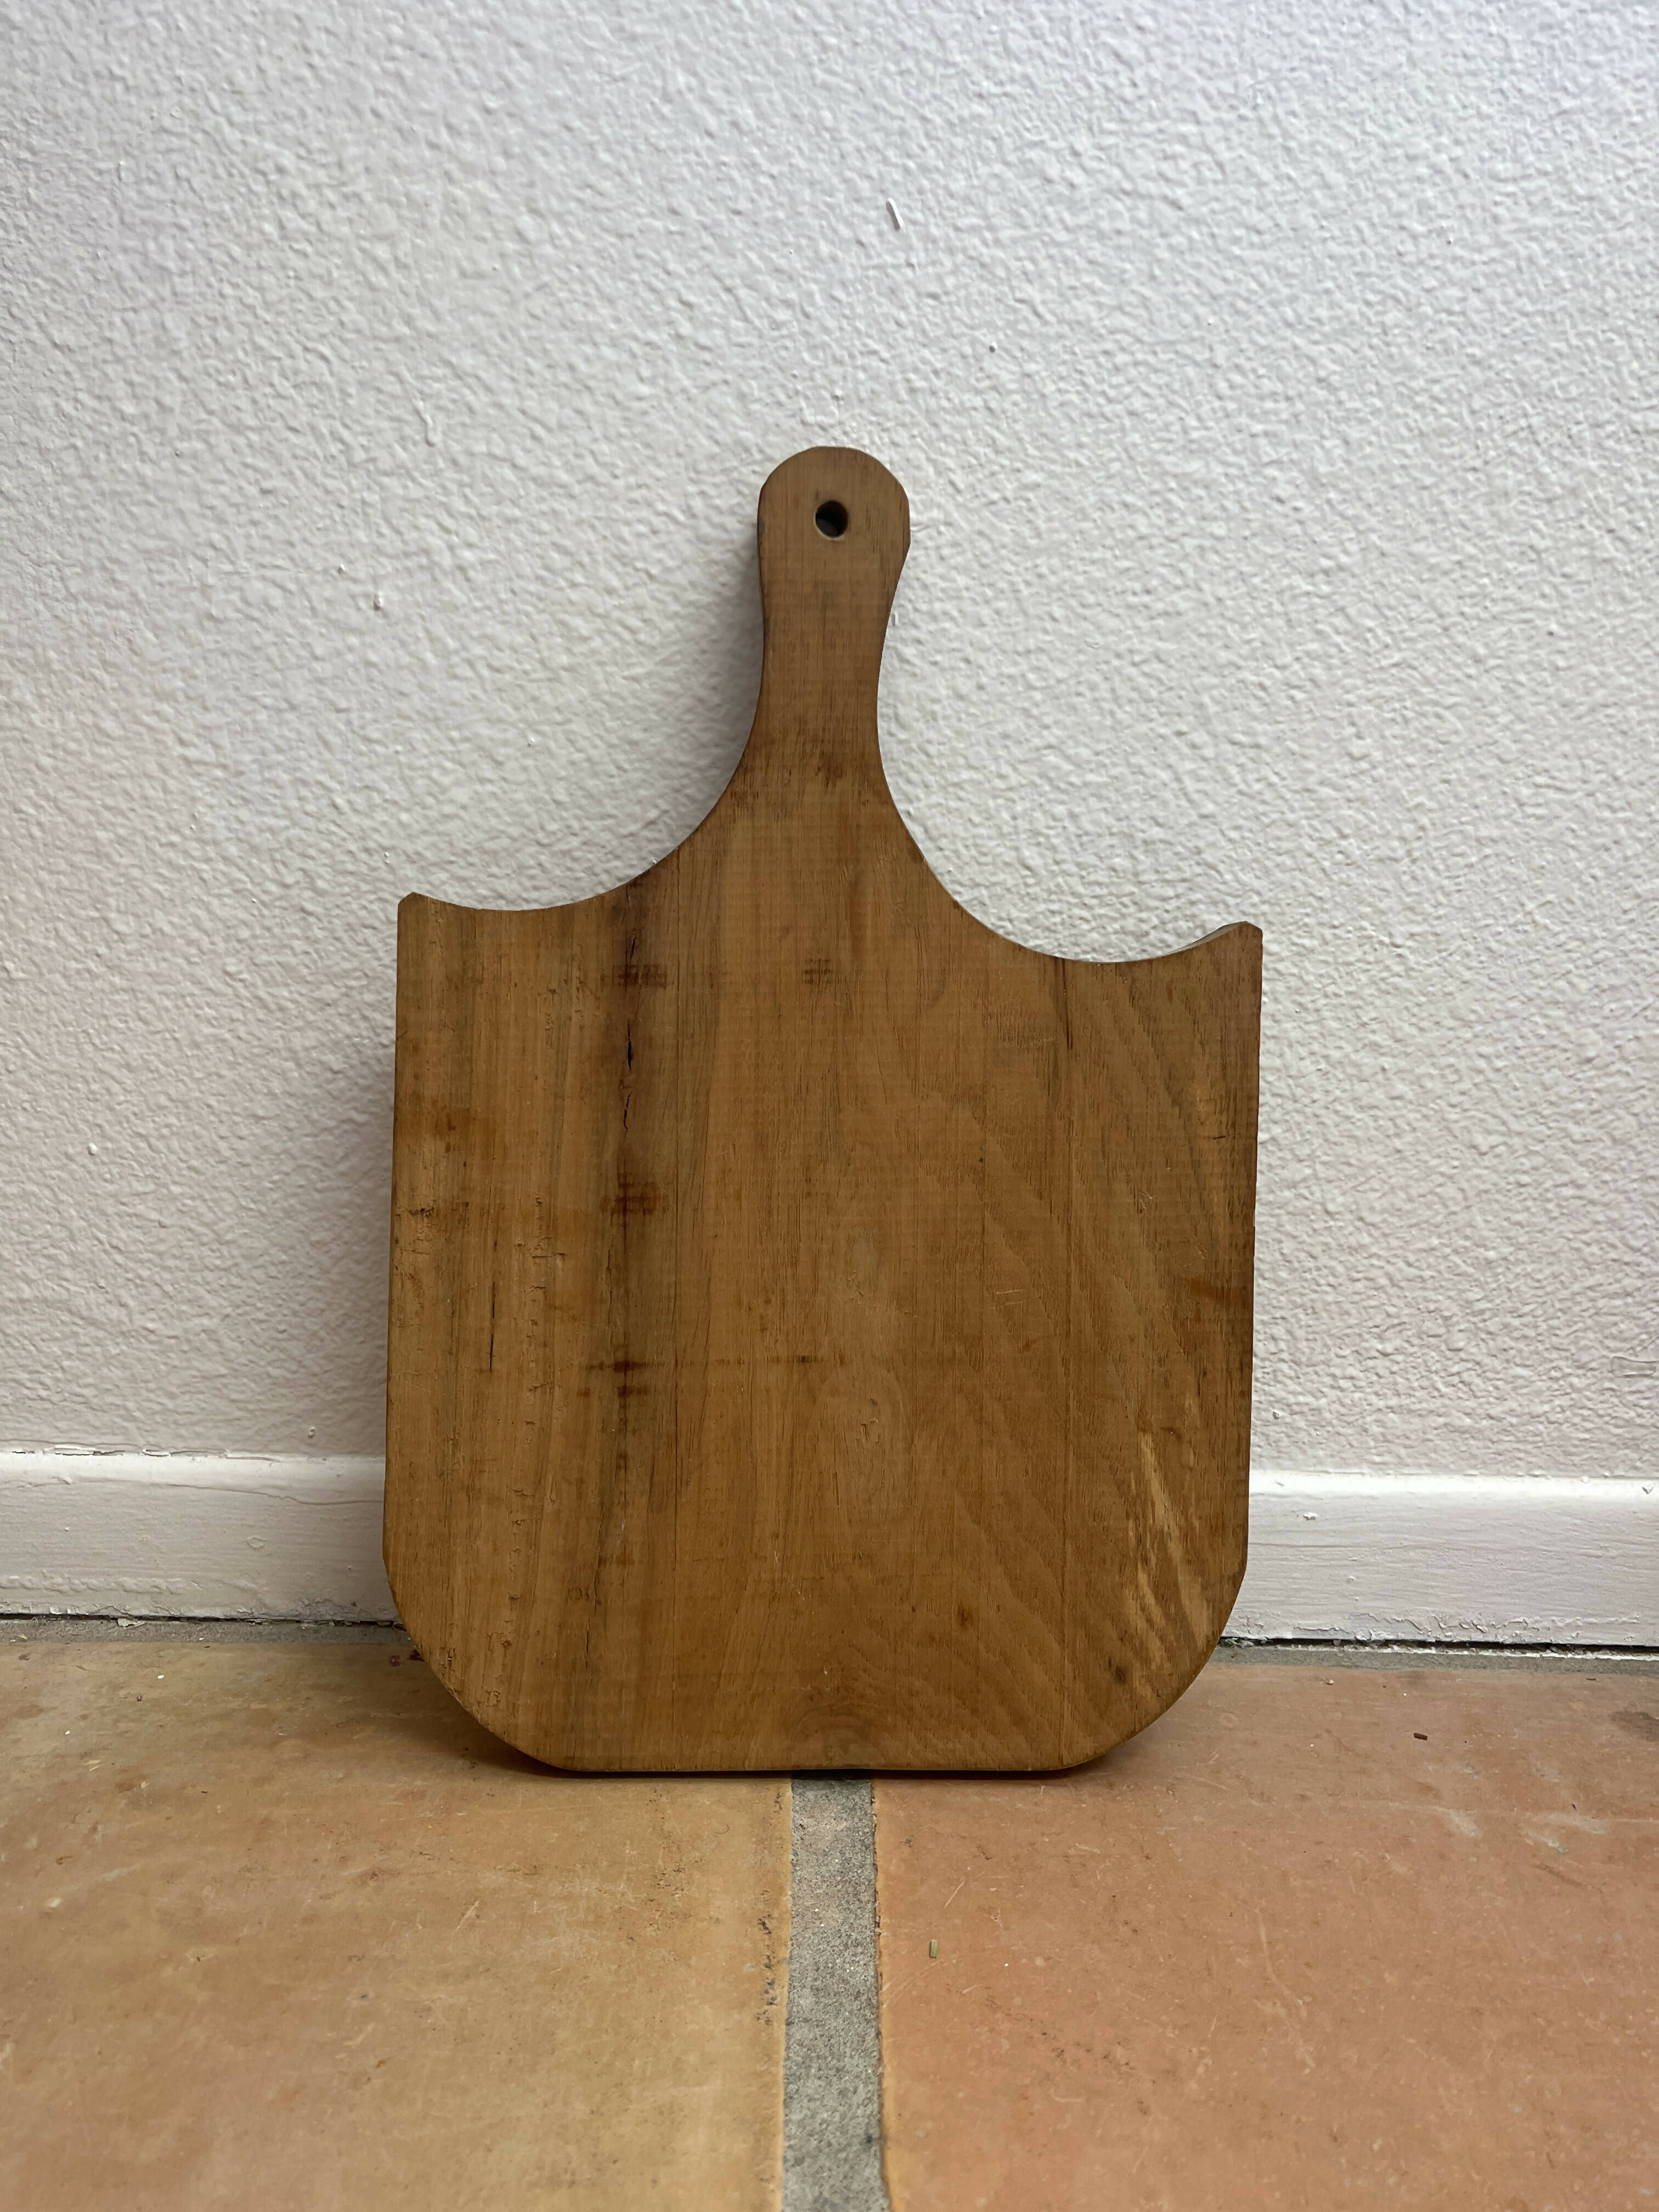 Very Old Vintage Cutting Board